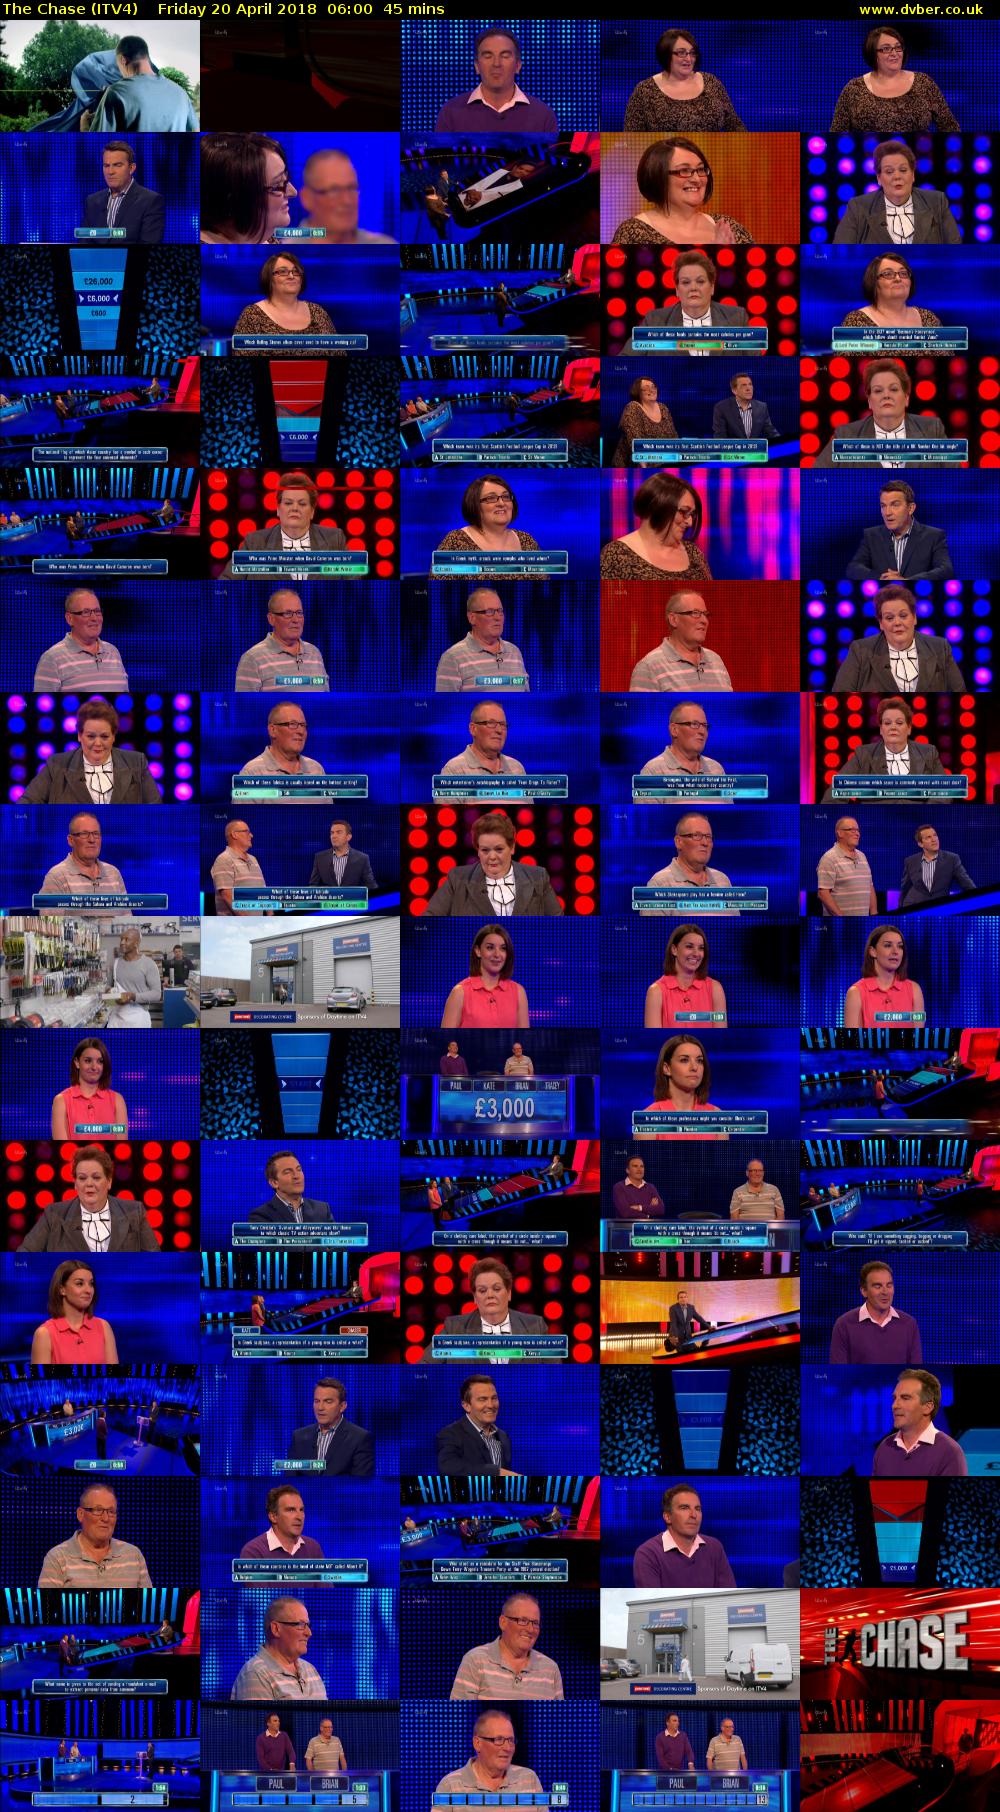 The Chase (ITV4) Friday 20 April 2018 06:00 - 06:45